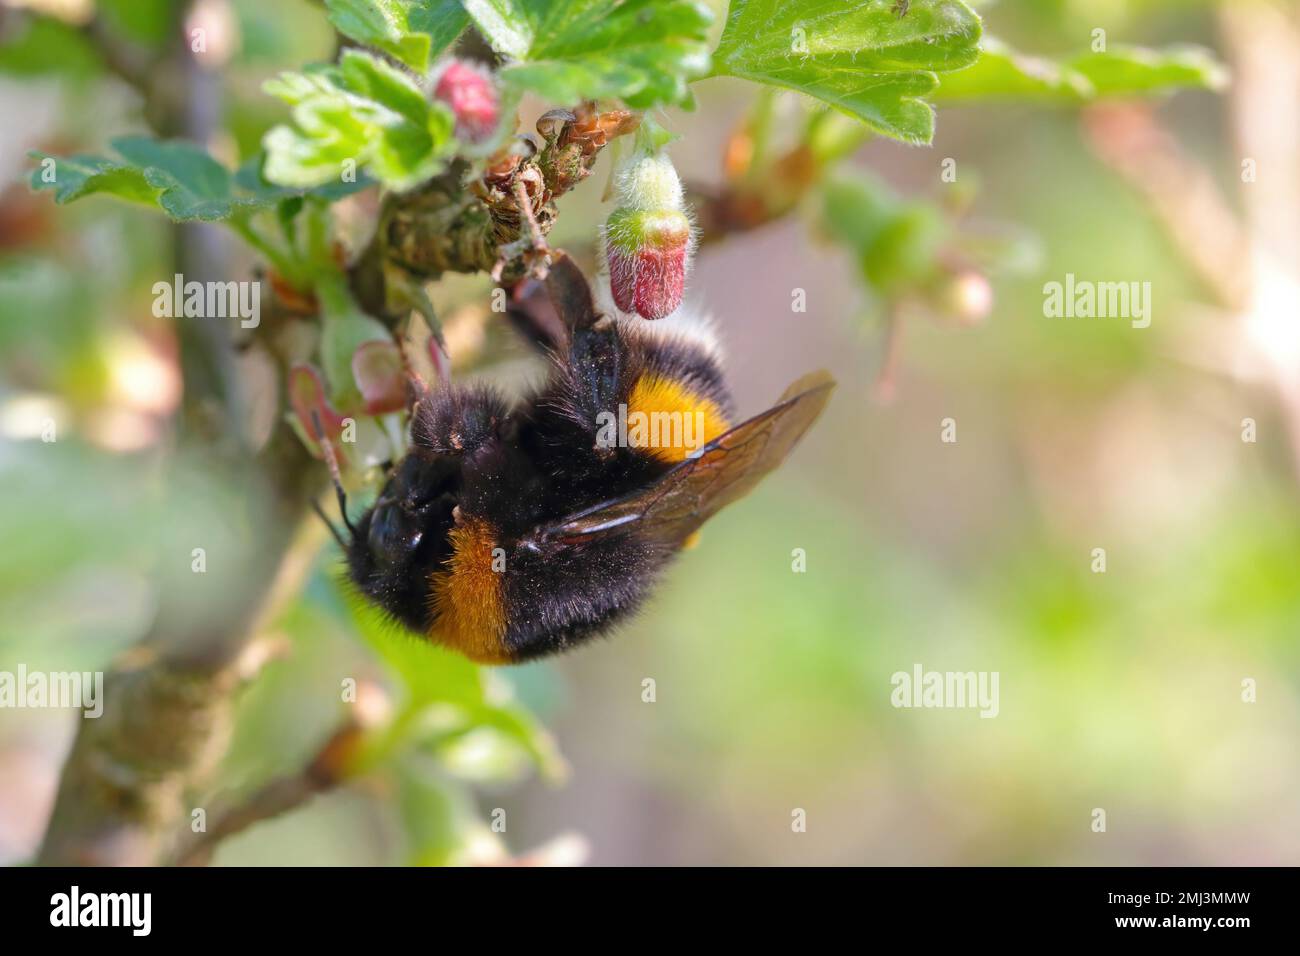 Bumblebee (Bombus sp.) pollinating flowers. Feeding, pollinating the gooseberry blossom in the garden in spring. Stock Photo